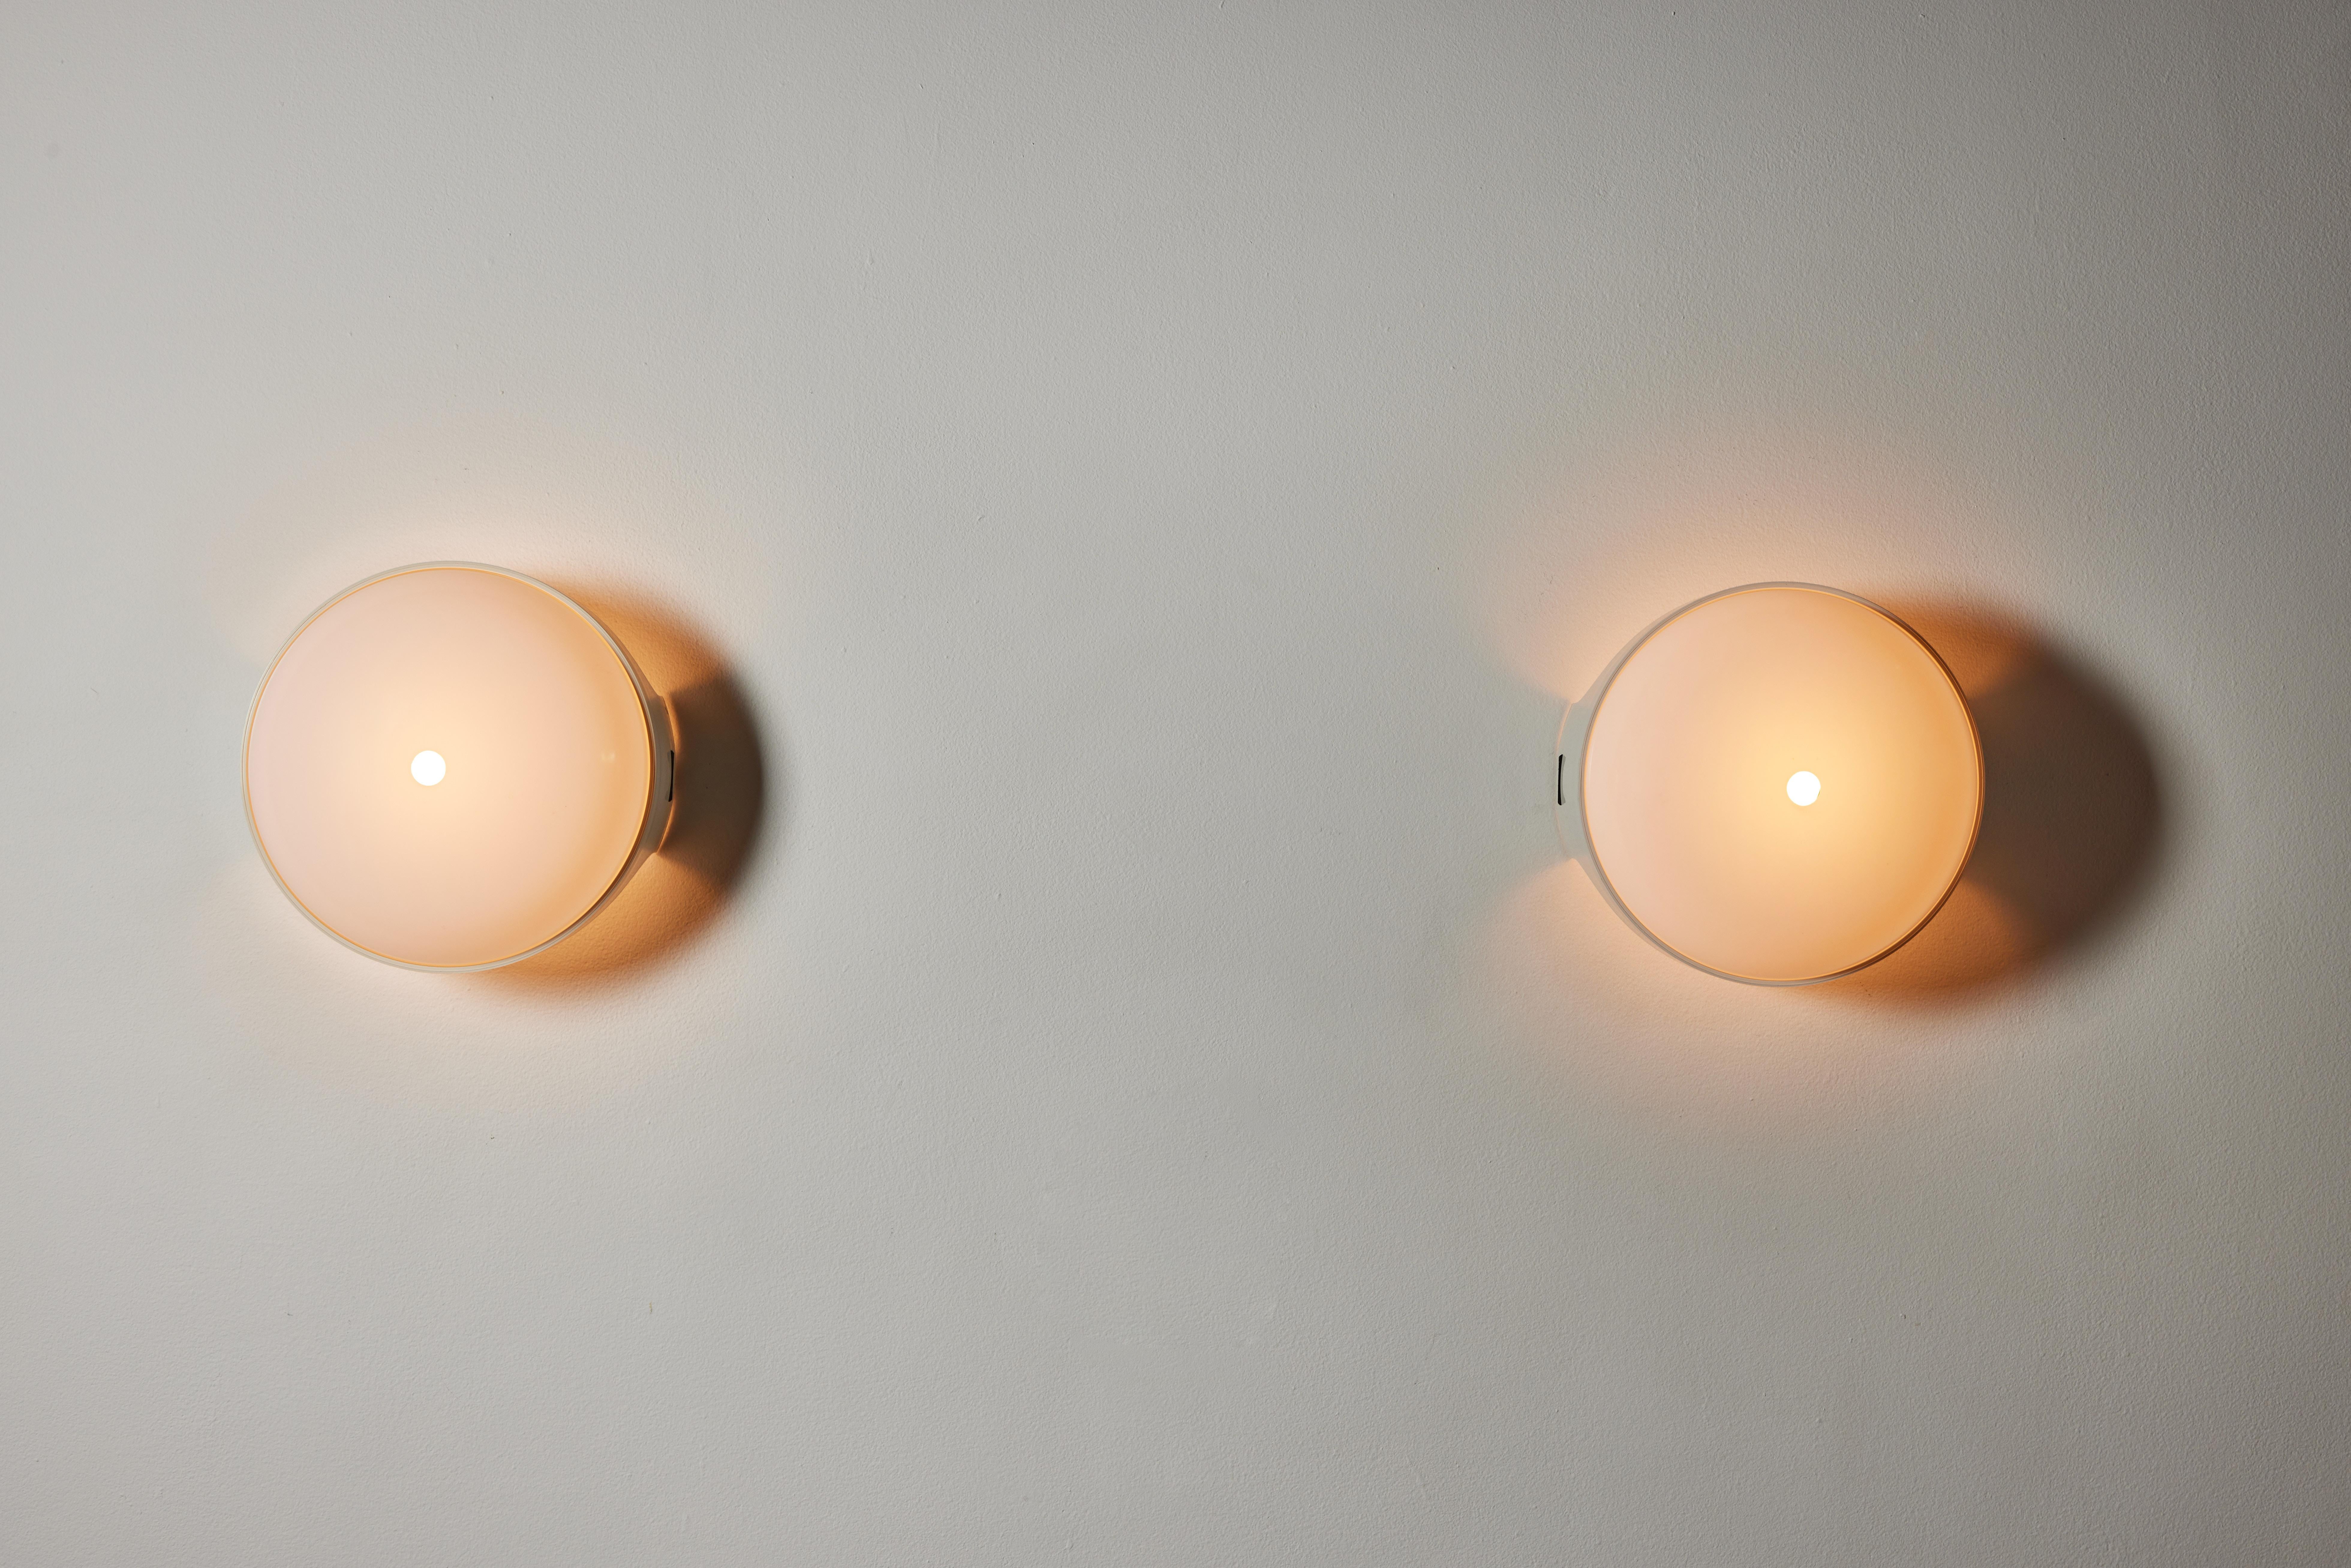 Pair of 4332 wall/ceiling lights by Gian Emilio, Piero & Anna Monti for Kartell. Designed and manufactured in Italy, 1966. Resin, acrylic. Rewired for U.S. standards. We recommend one E27 60w maximum bulb per fixture. Bulbs provided as a one time